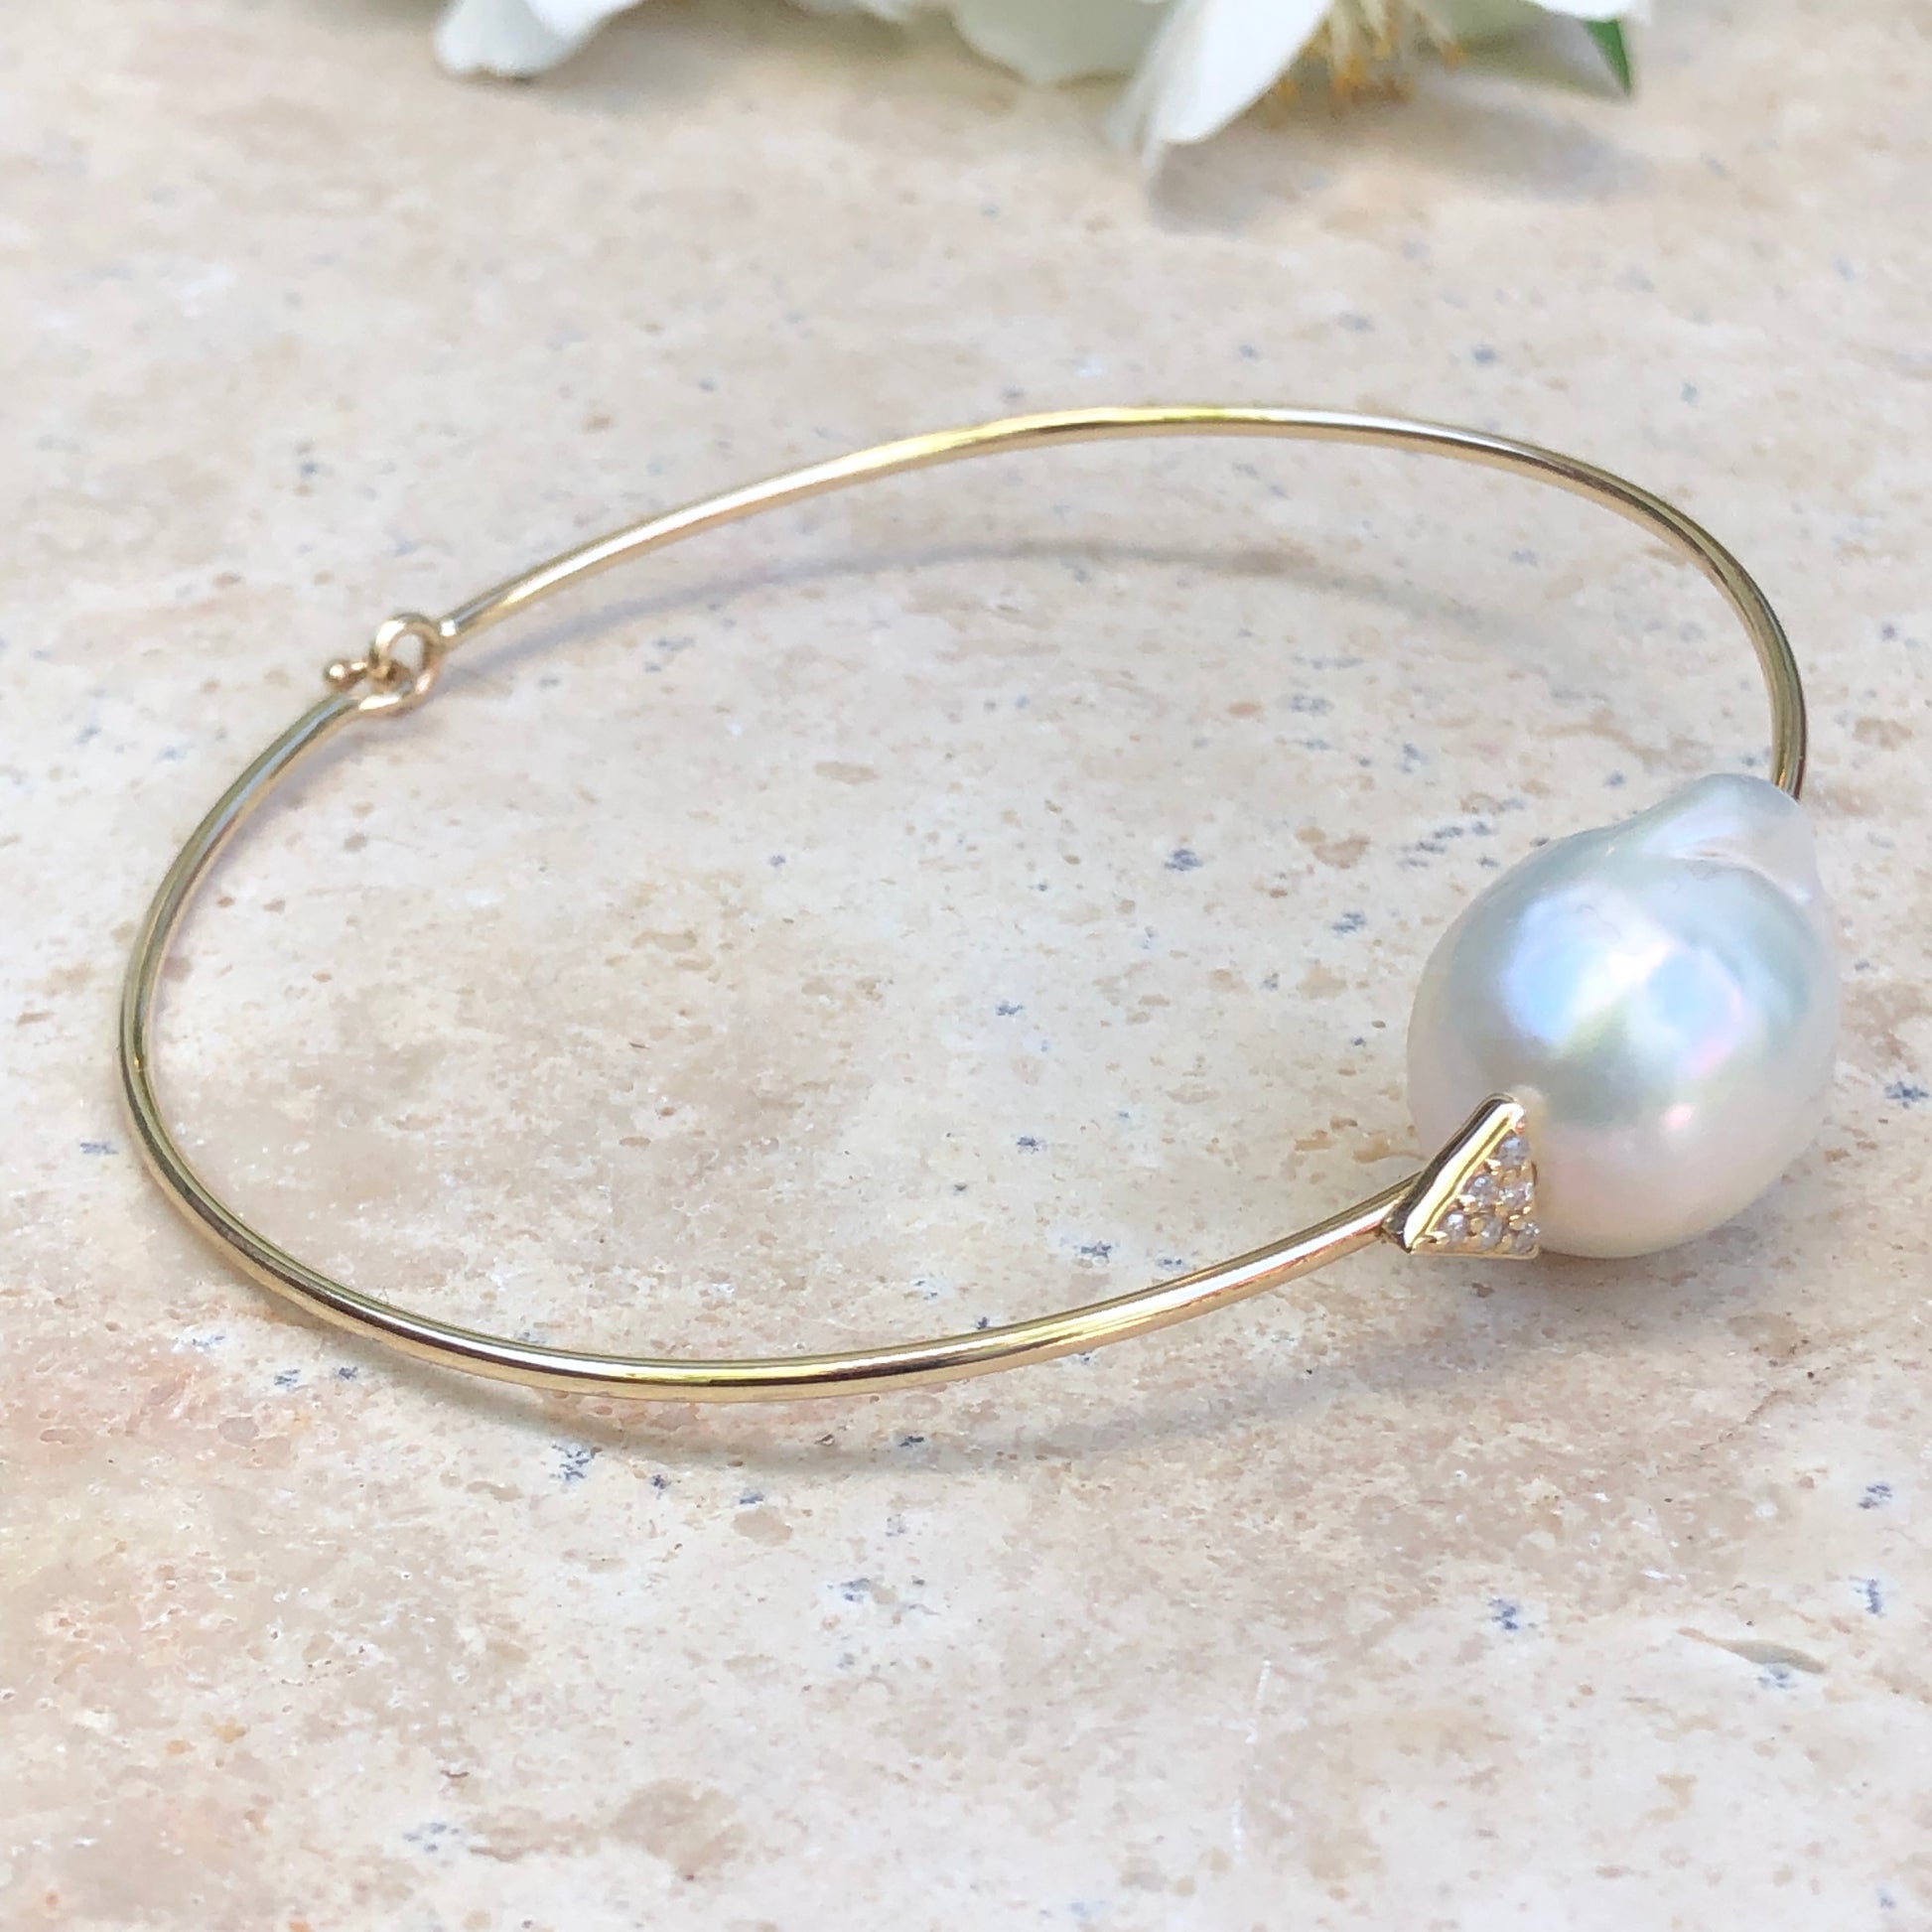 14KT Yellow Gold Pave Diamond + Baroque Pearl Wire Bangle Bracelet, 14KT Yellow Gold Pave Diamond + Baroque Pearl Wire Bangle Bracelet - Legacy Saint Jewelry